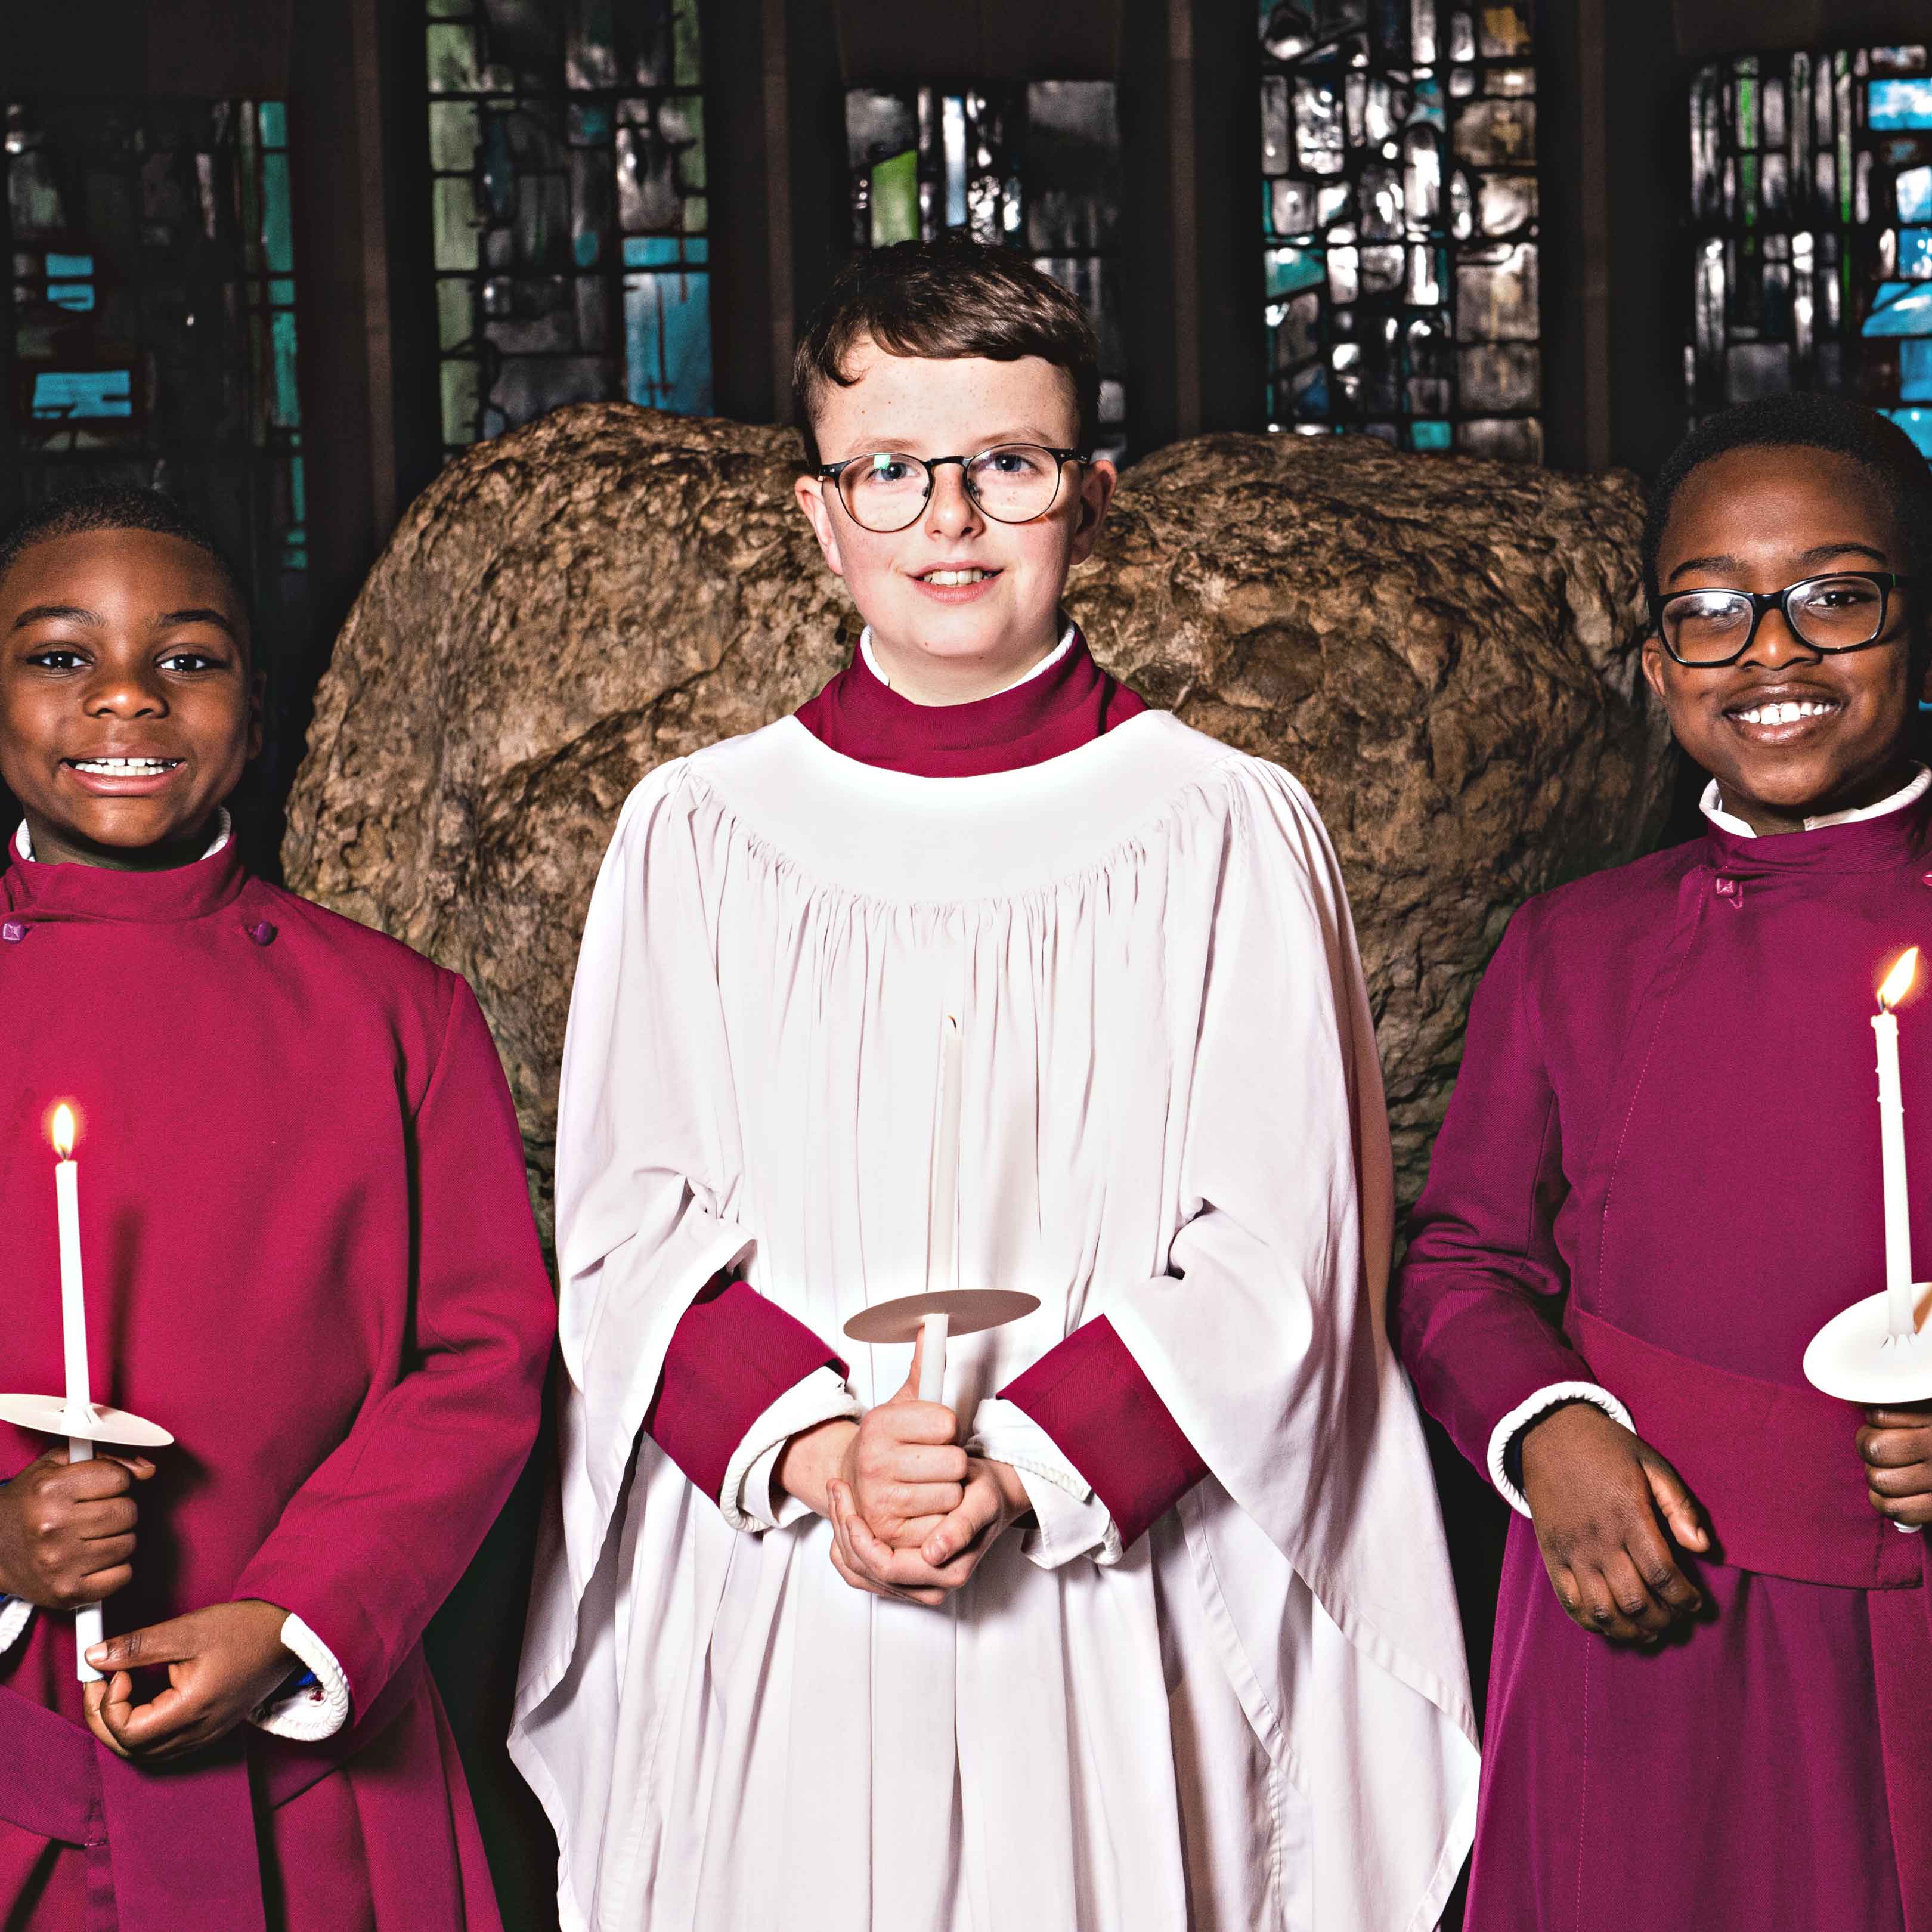 Choristers holding candles